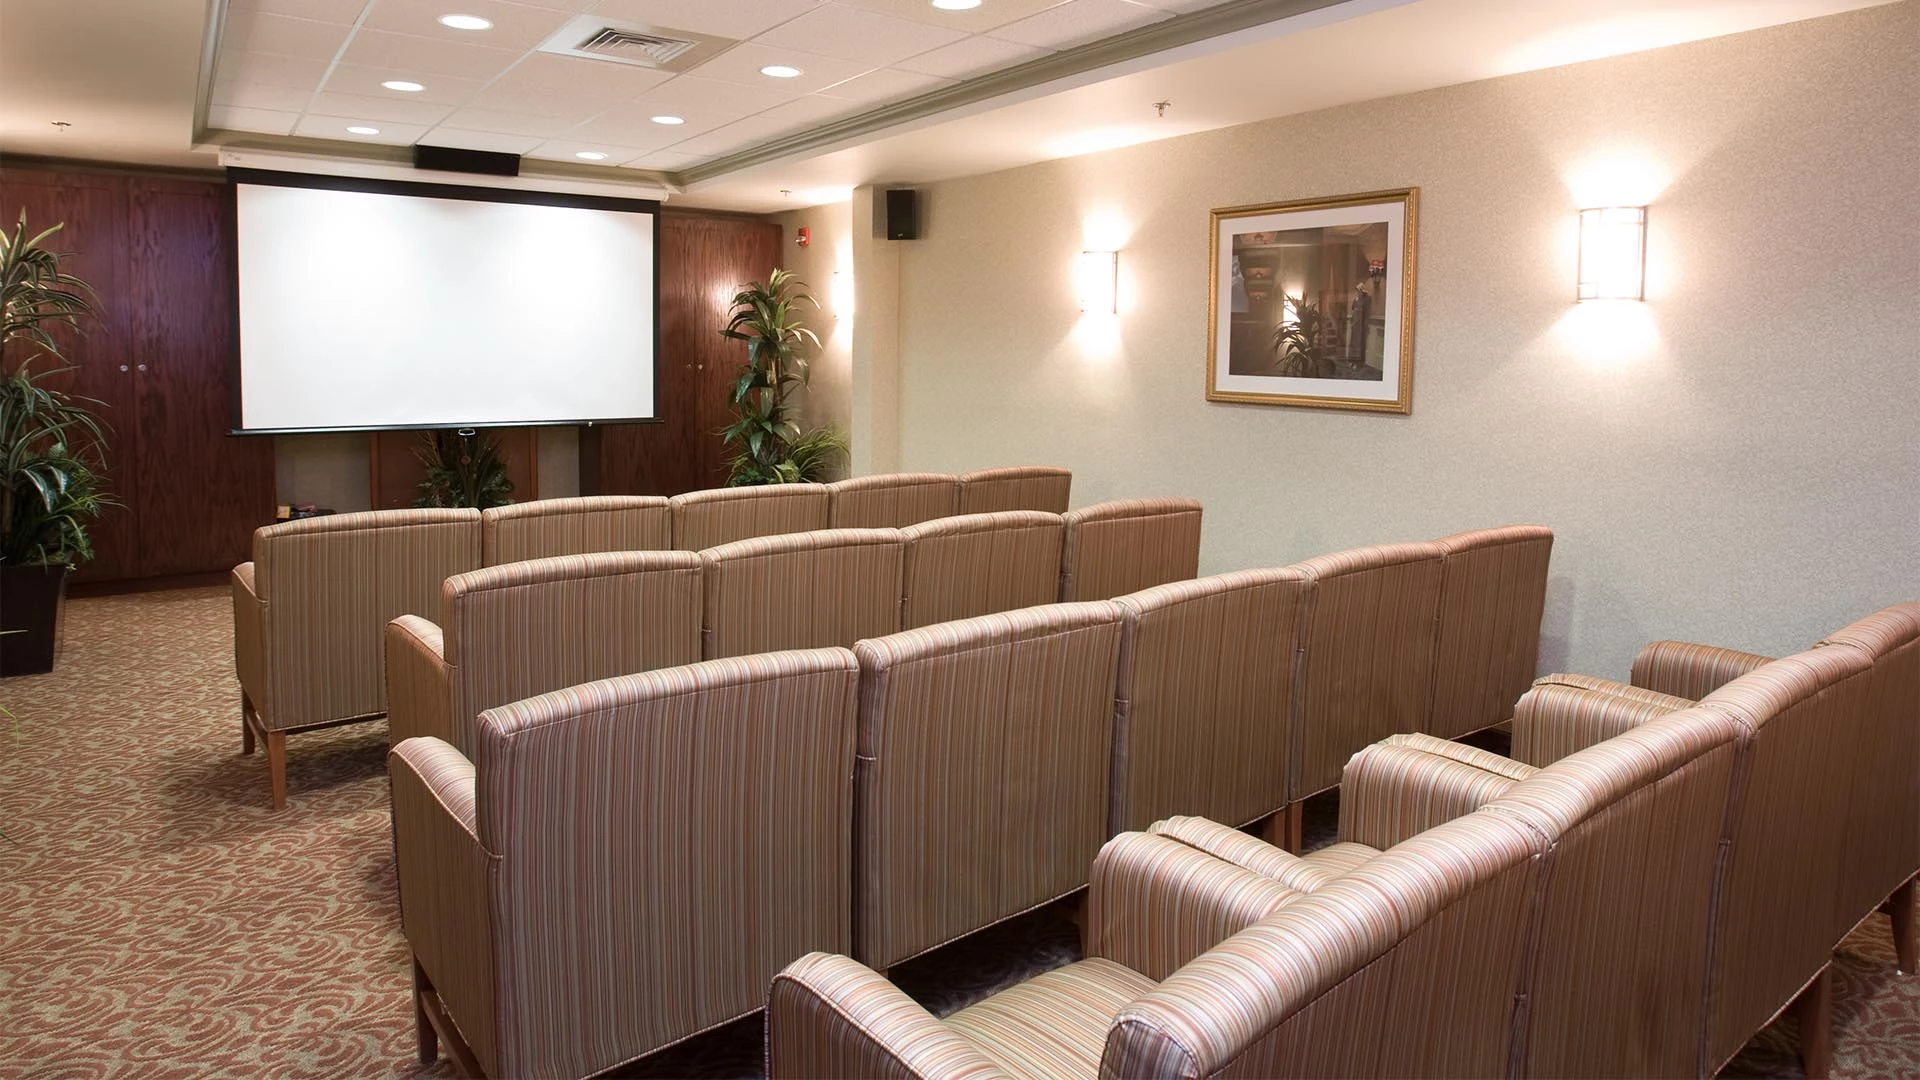 Rows of chairs and a movie screen in the Rutherford Heights senior living movie room